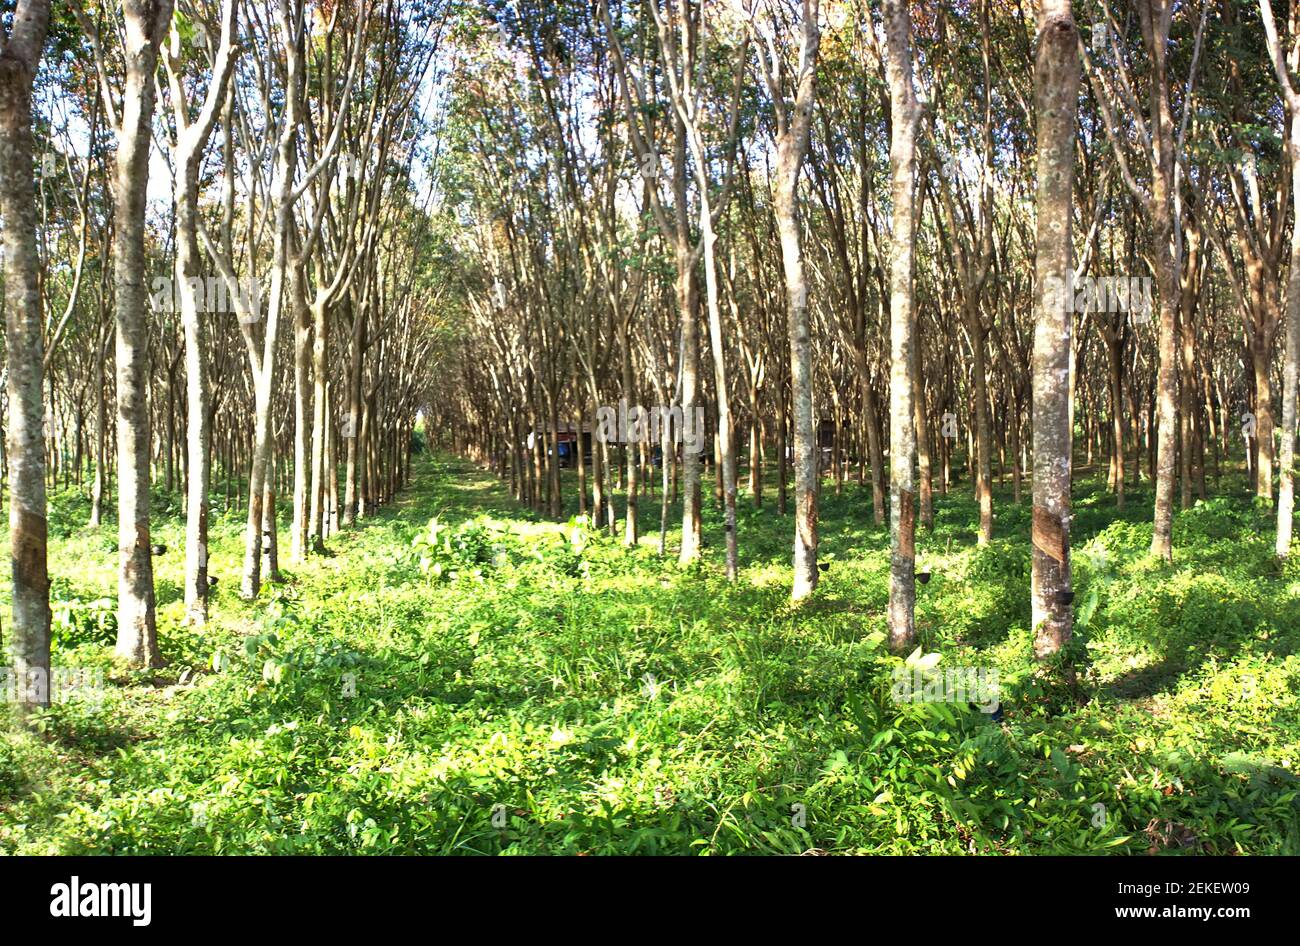 Landscape of Hevea brasiliensis Muell. Arg. or Para Rubber garden panorama Stock Photo